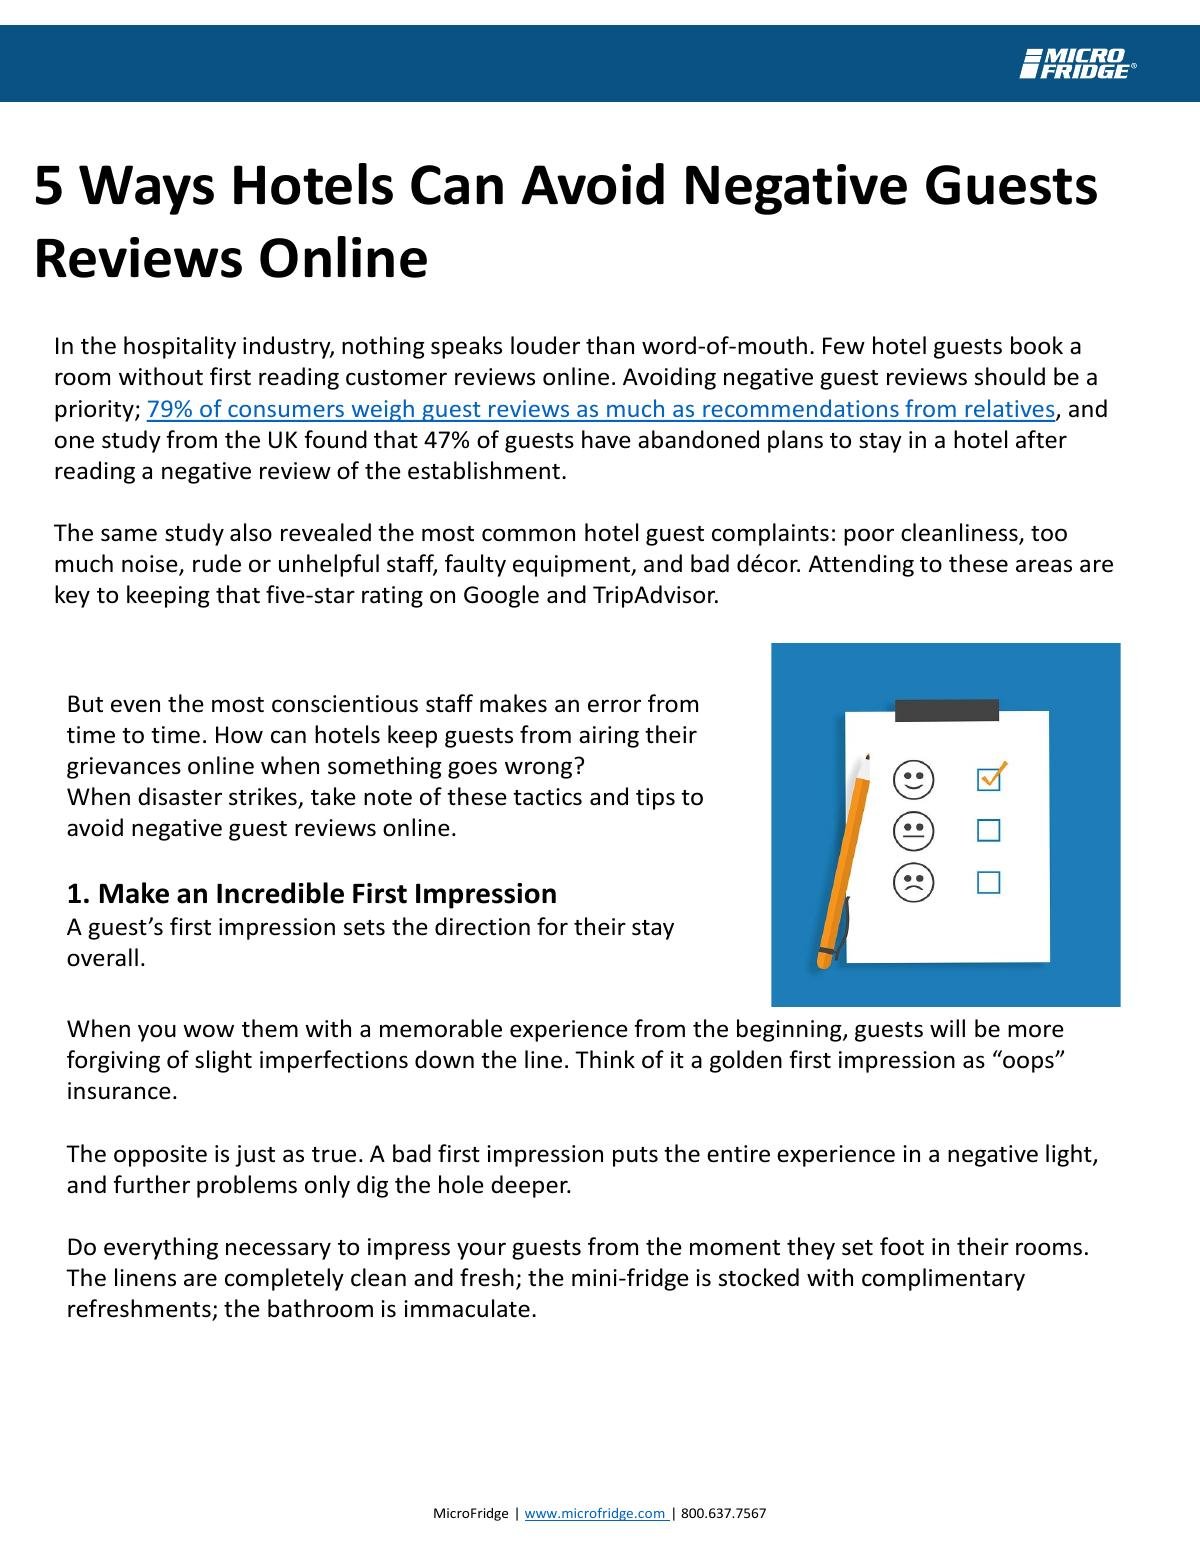 How Hotels Can Avoid Negative Guests Reviews Online 